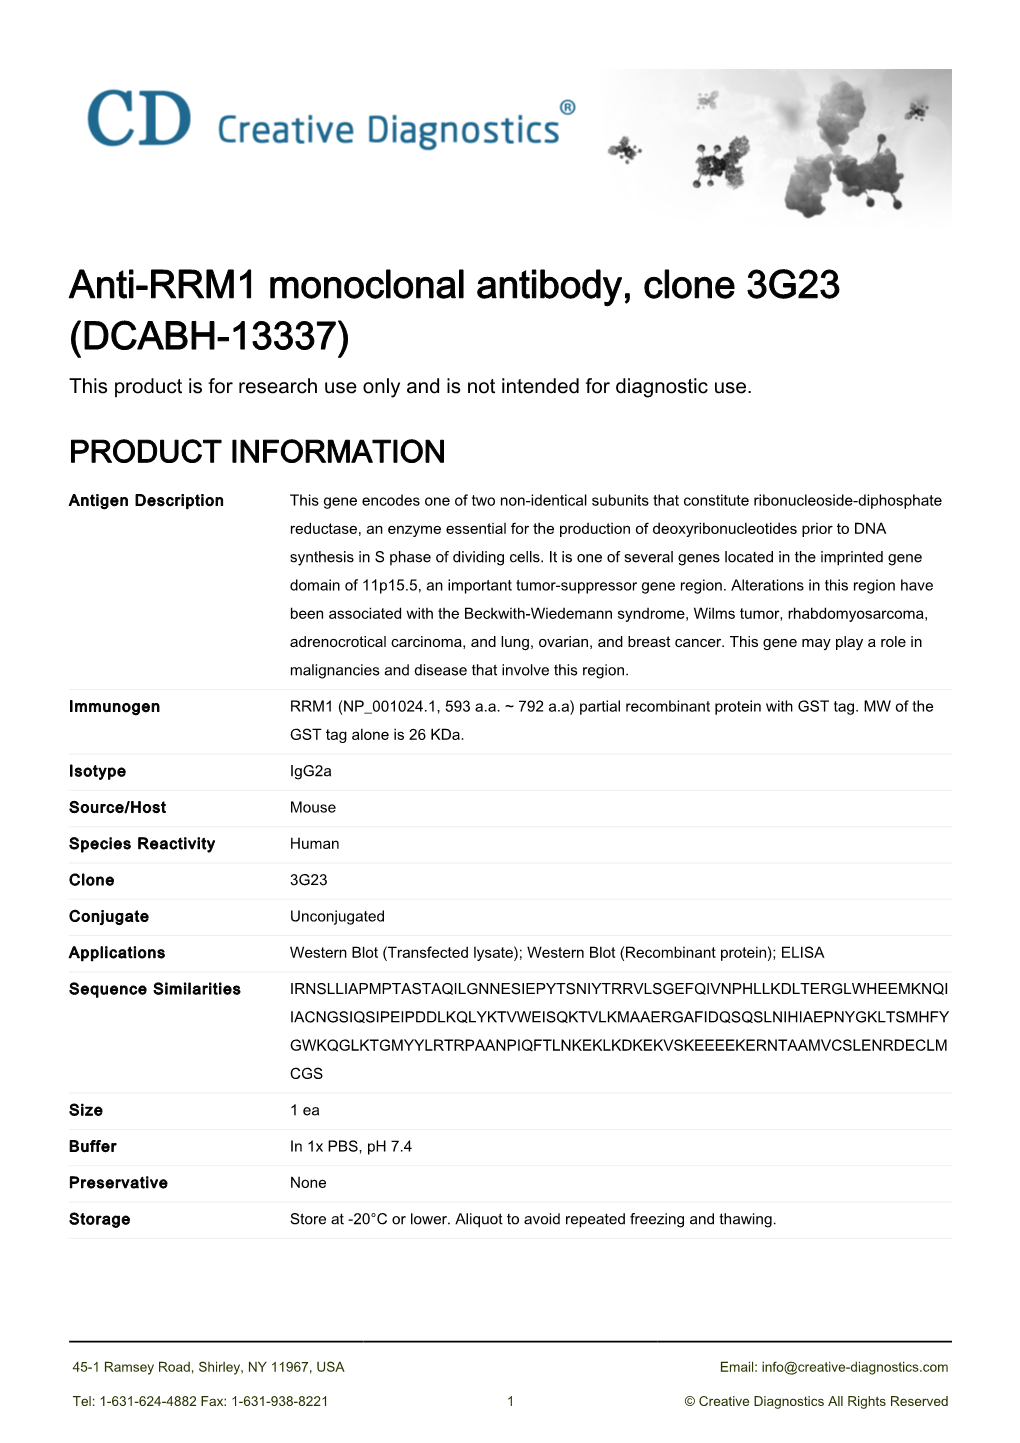 Anti-RRM1 Monoclonal Antibody, Clone 3G23 (DCABH-13337) This Product Is for Research Use Only and Is Not Intended for Diagnostic Use